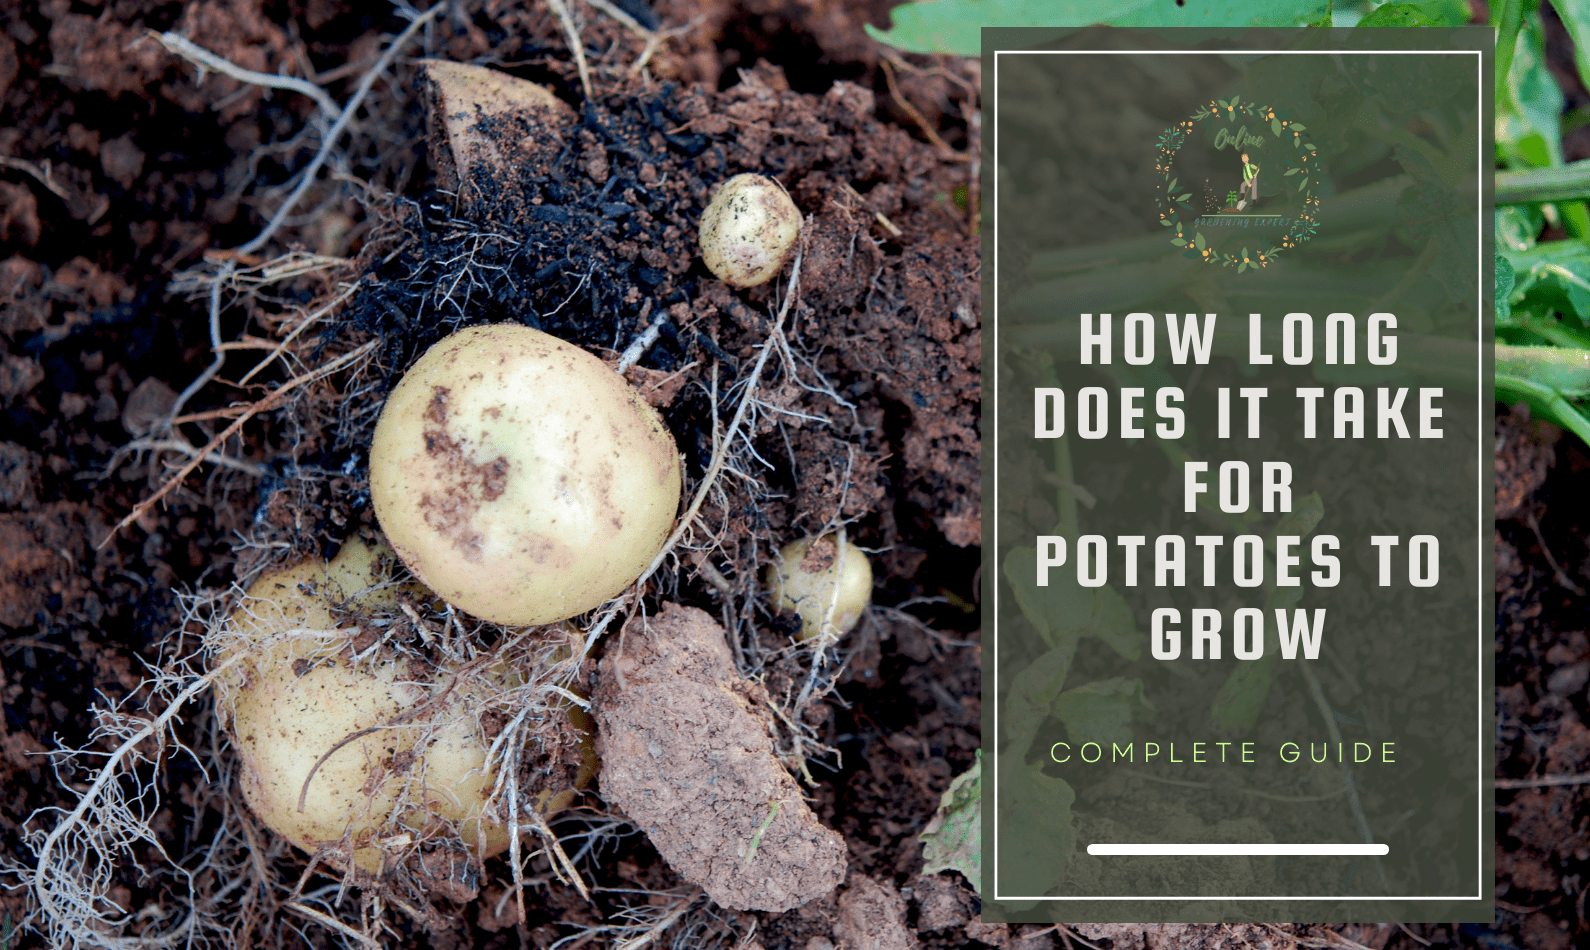 How long does it take for potatoes to grow